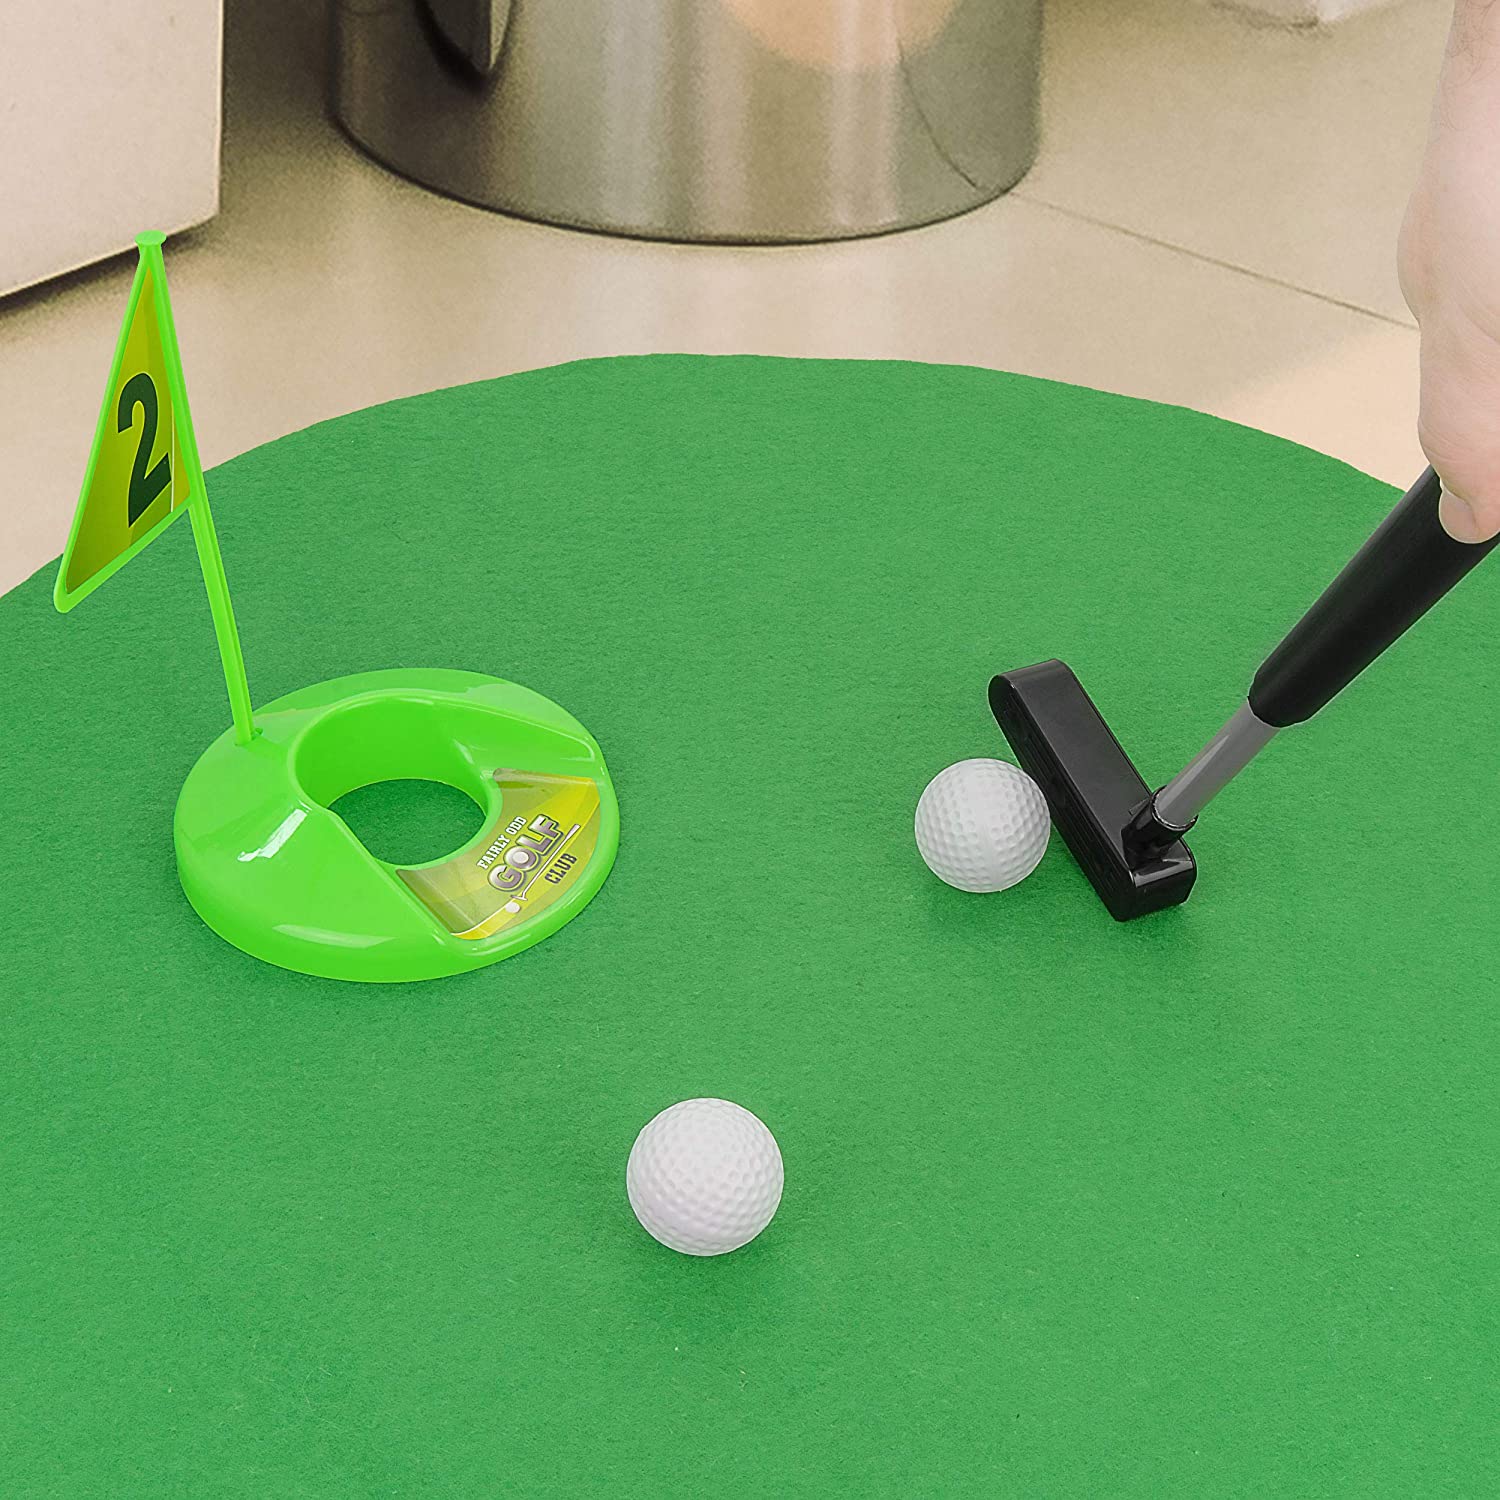 Toilet Putting Green - Potty Putter Toilet Time Golf Game